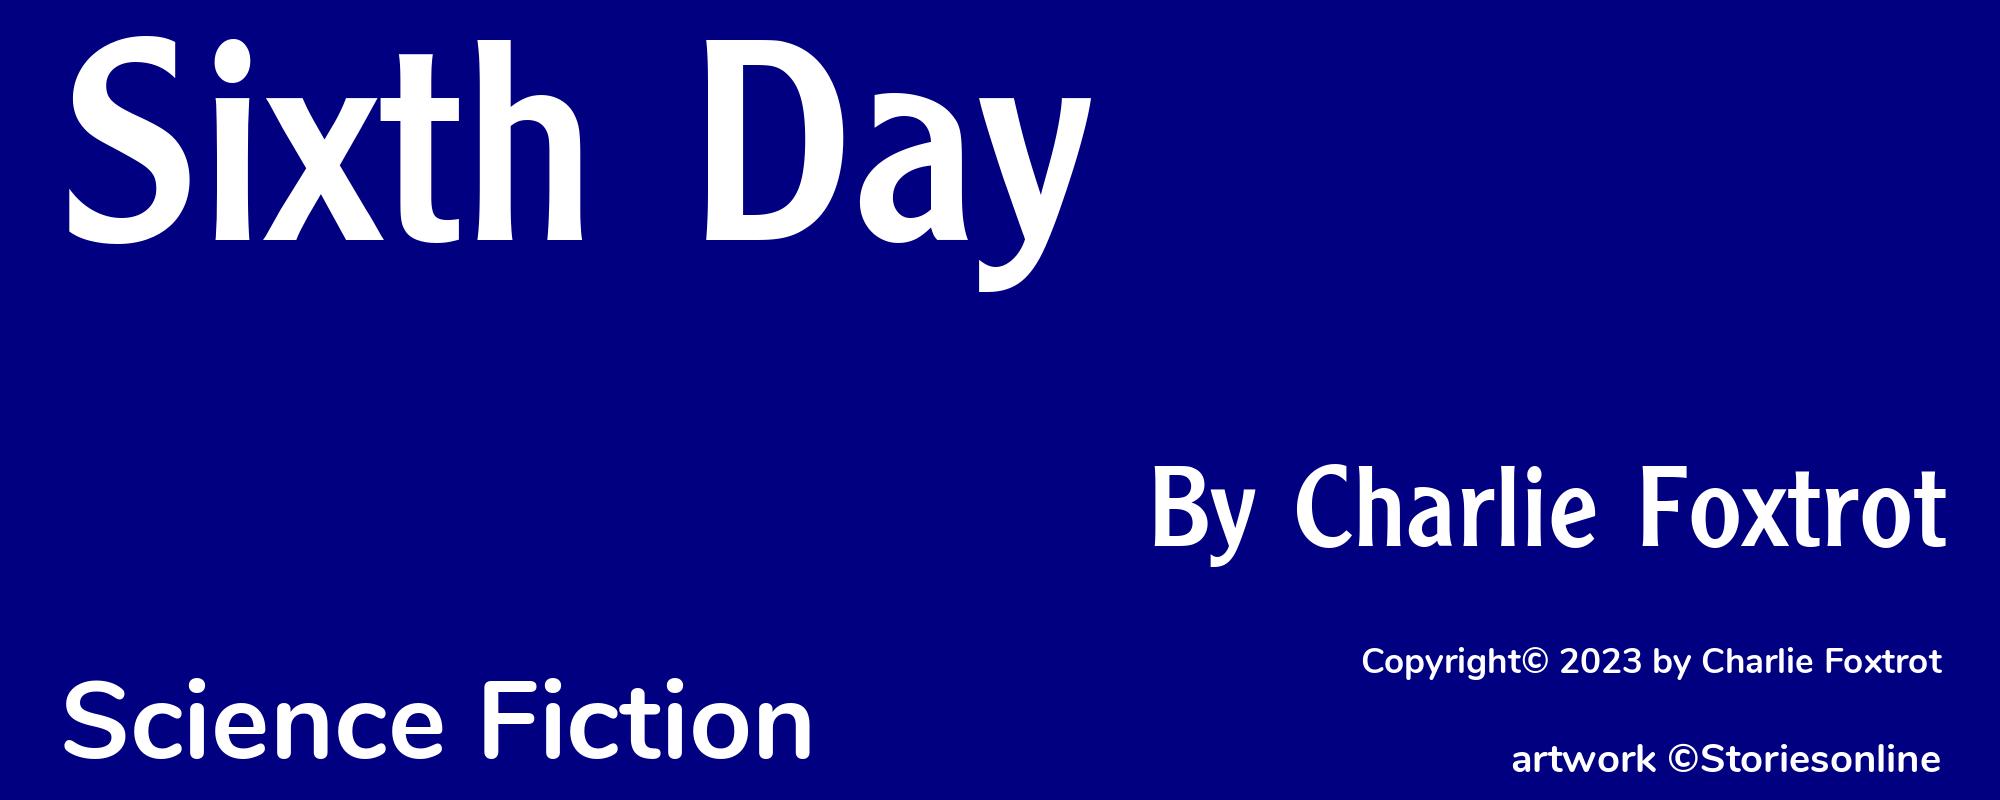 Sixth Day - Cover